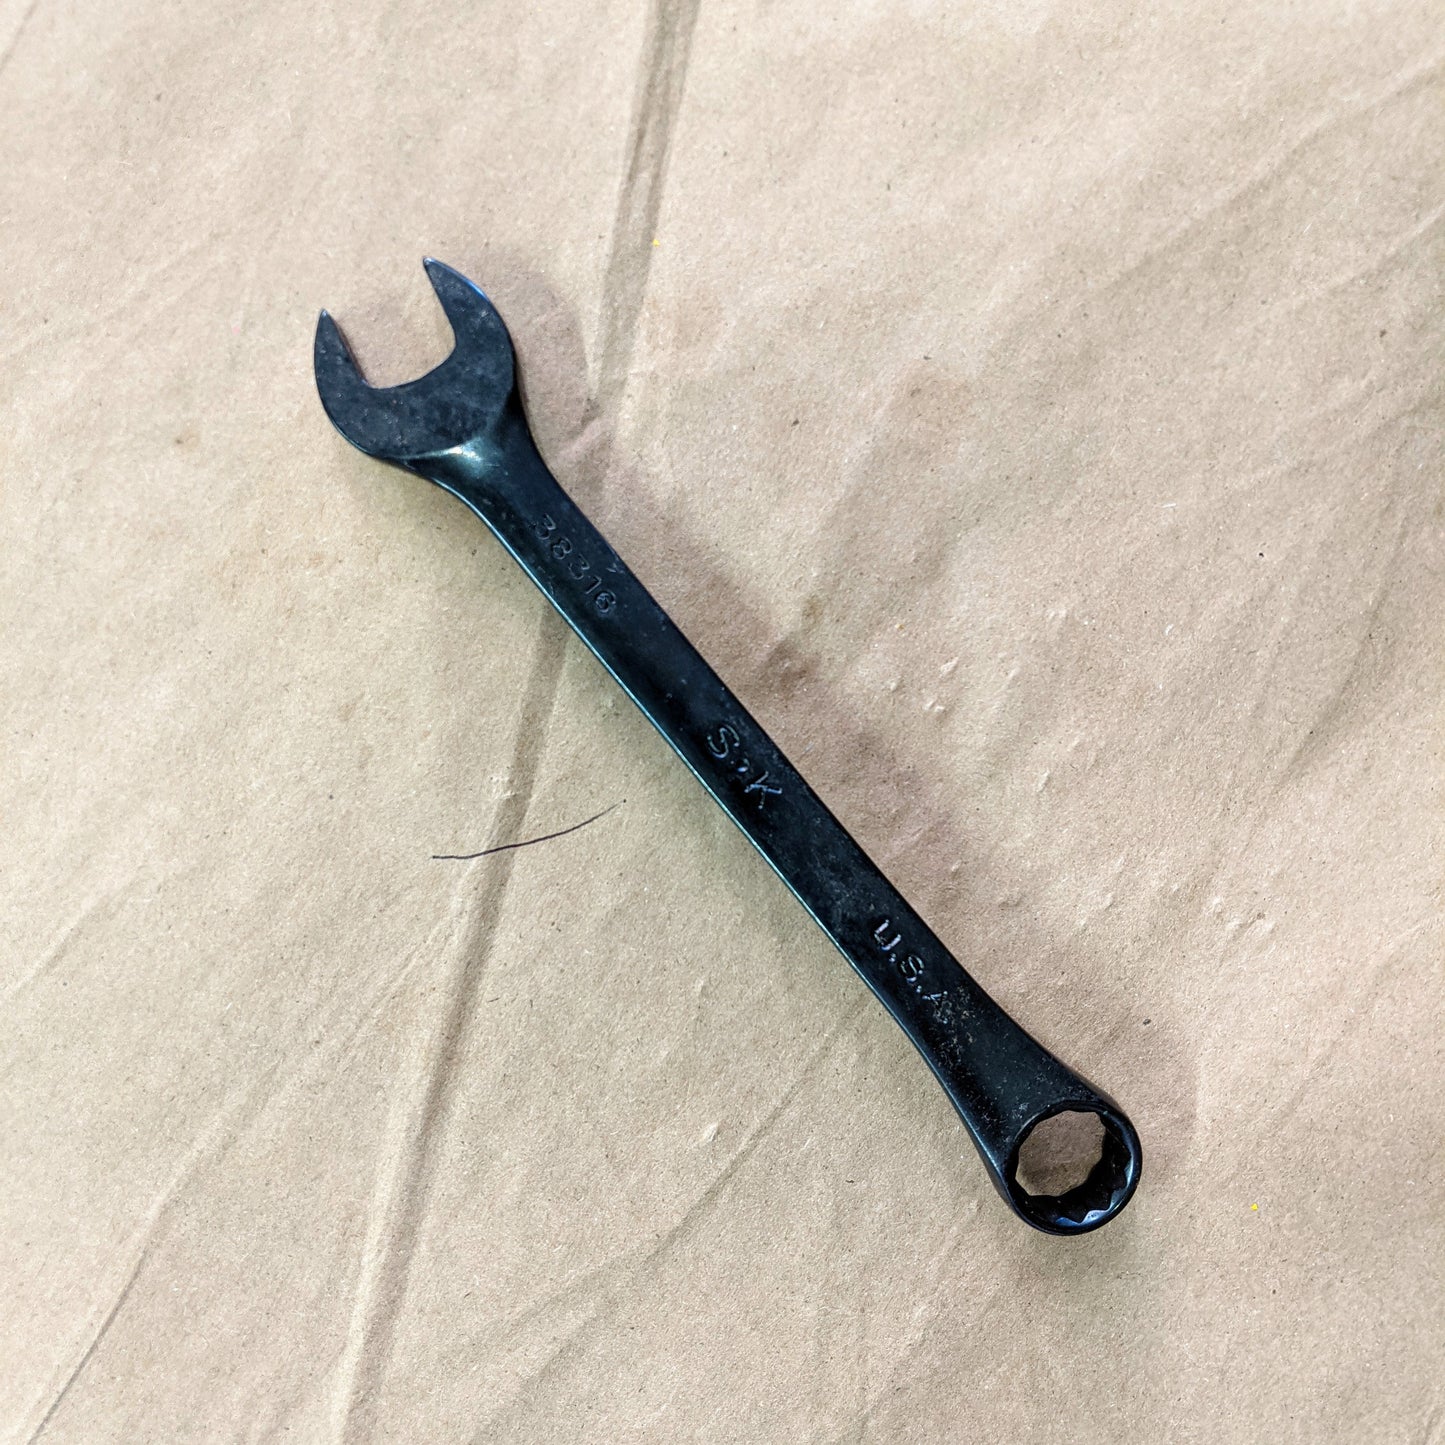 SK 8mm Black Oxide C. Wrench 12pt (rusty) (38308)